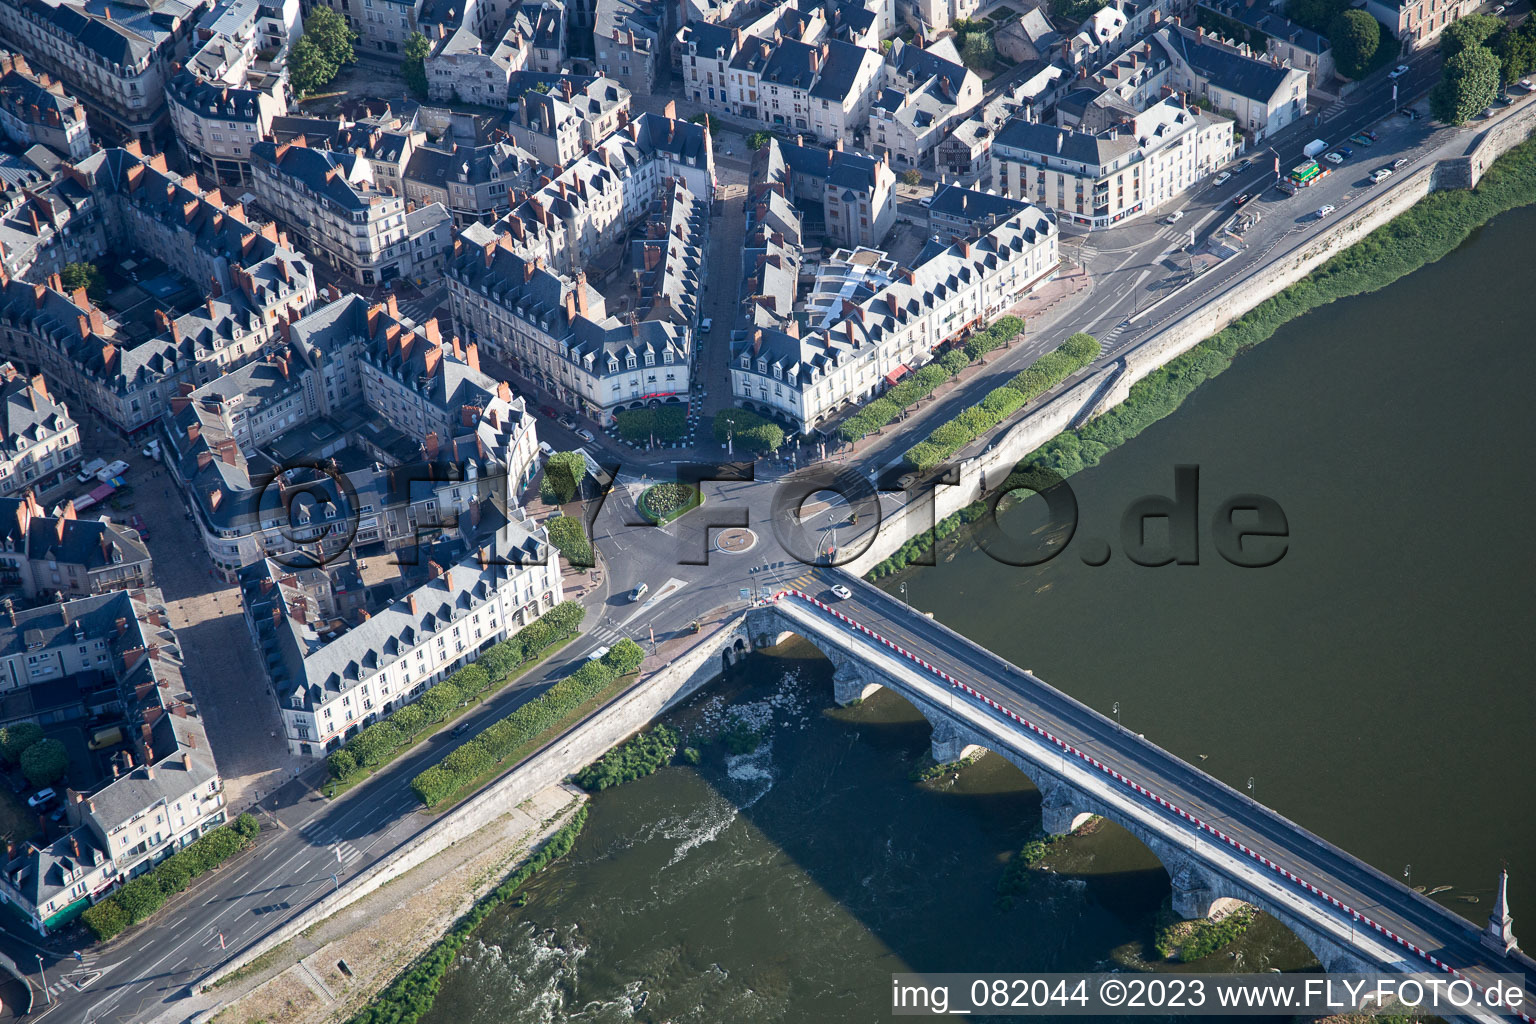 Blois in the state Loir et Cher, France from the drone perspective